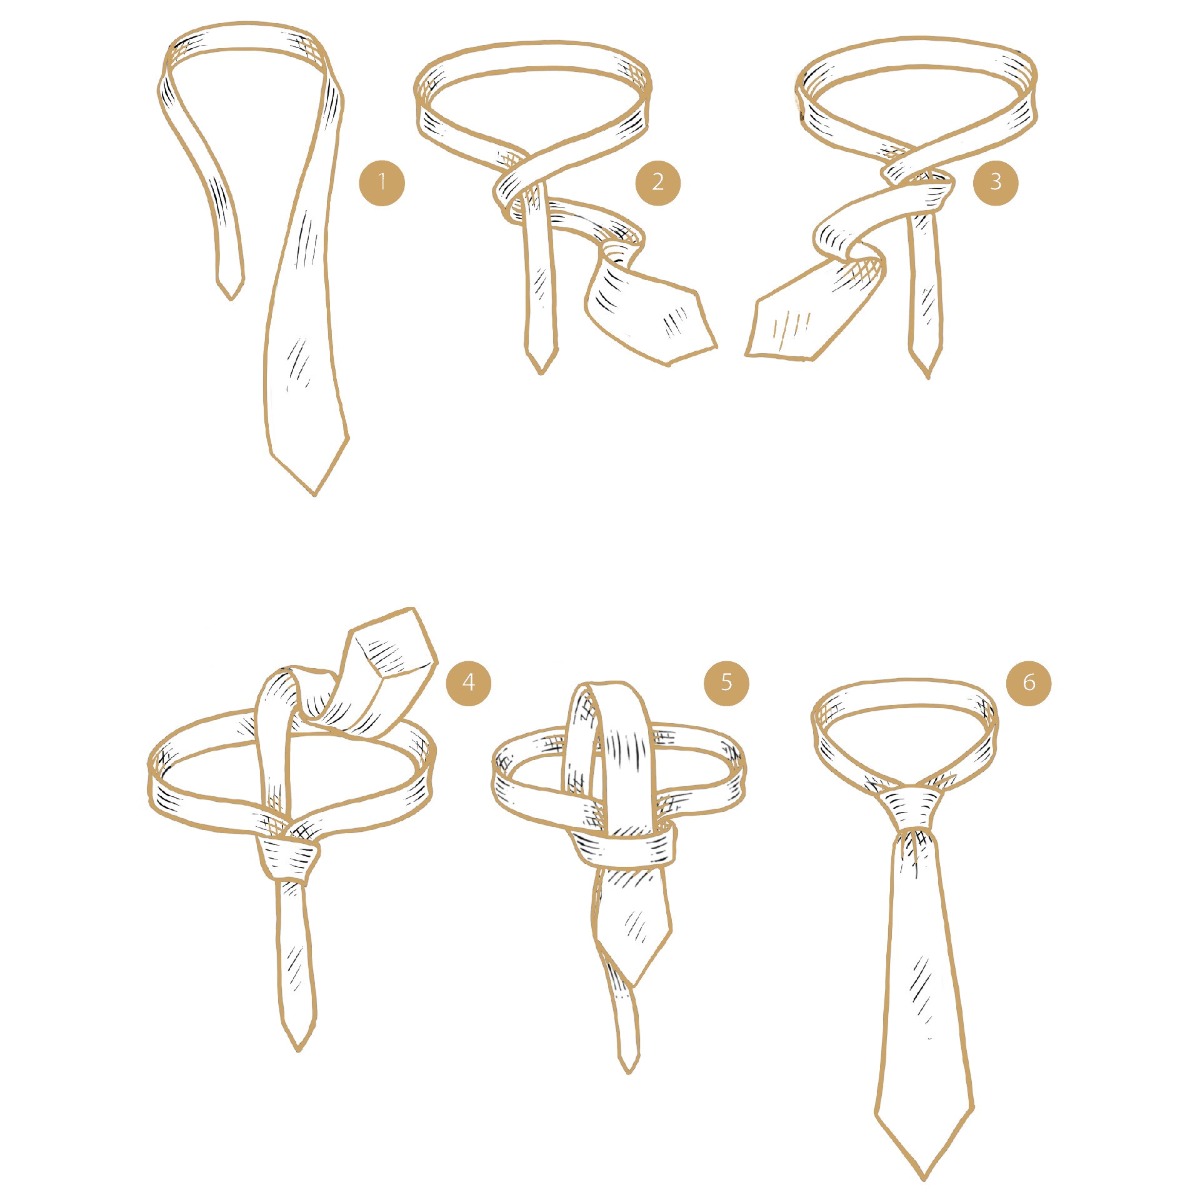 How to tie a tie - The four in hand knot